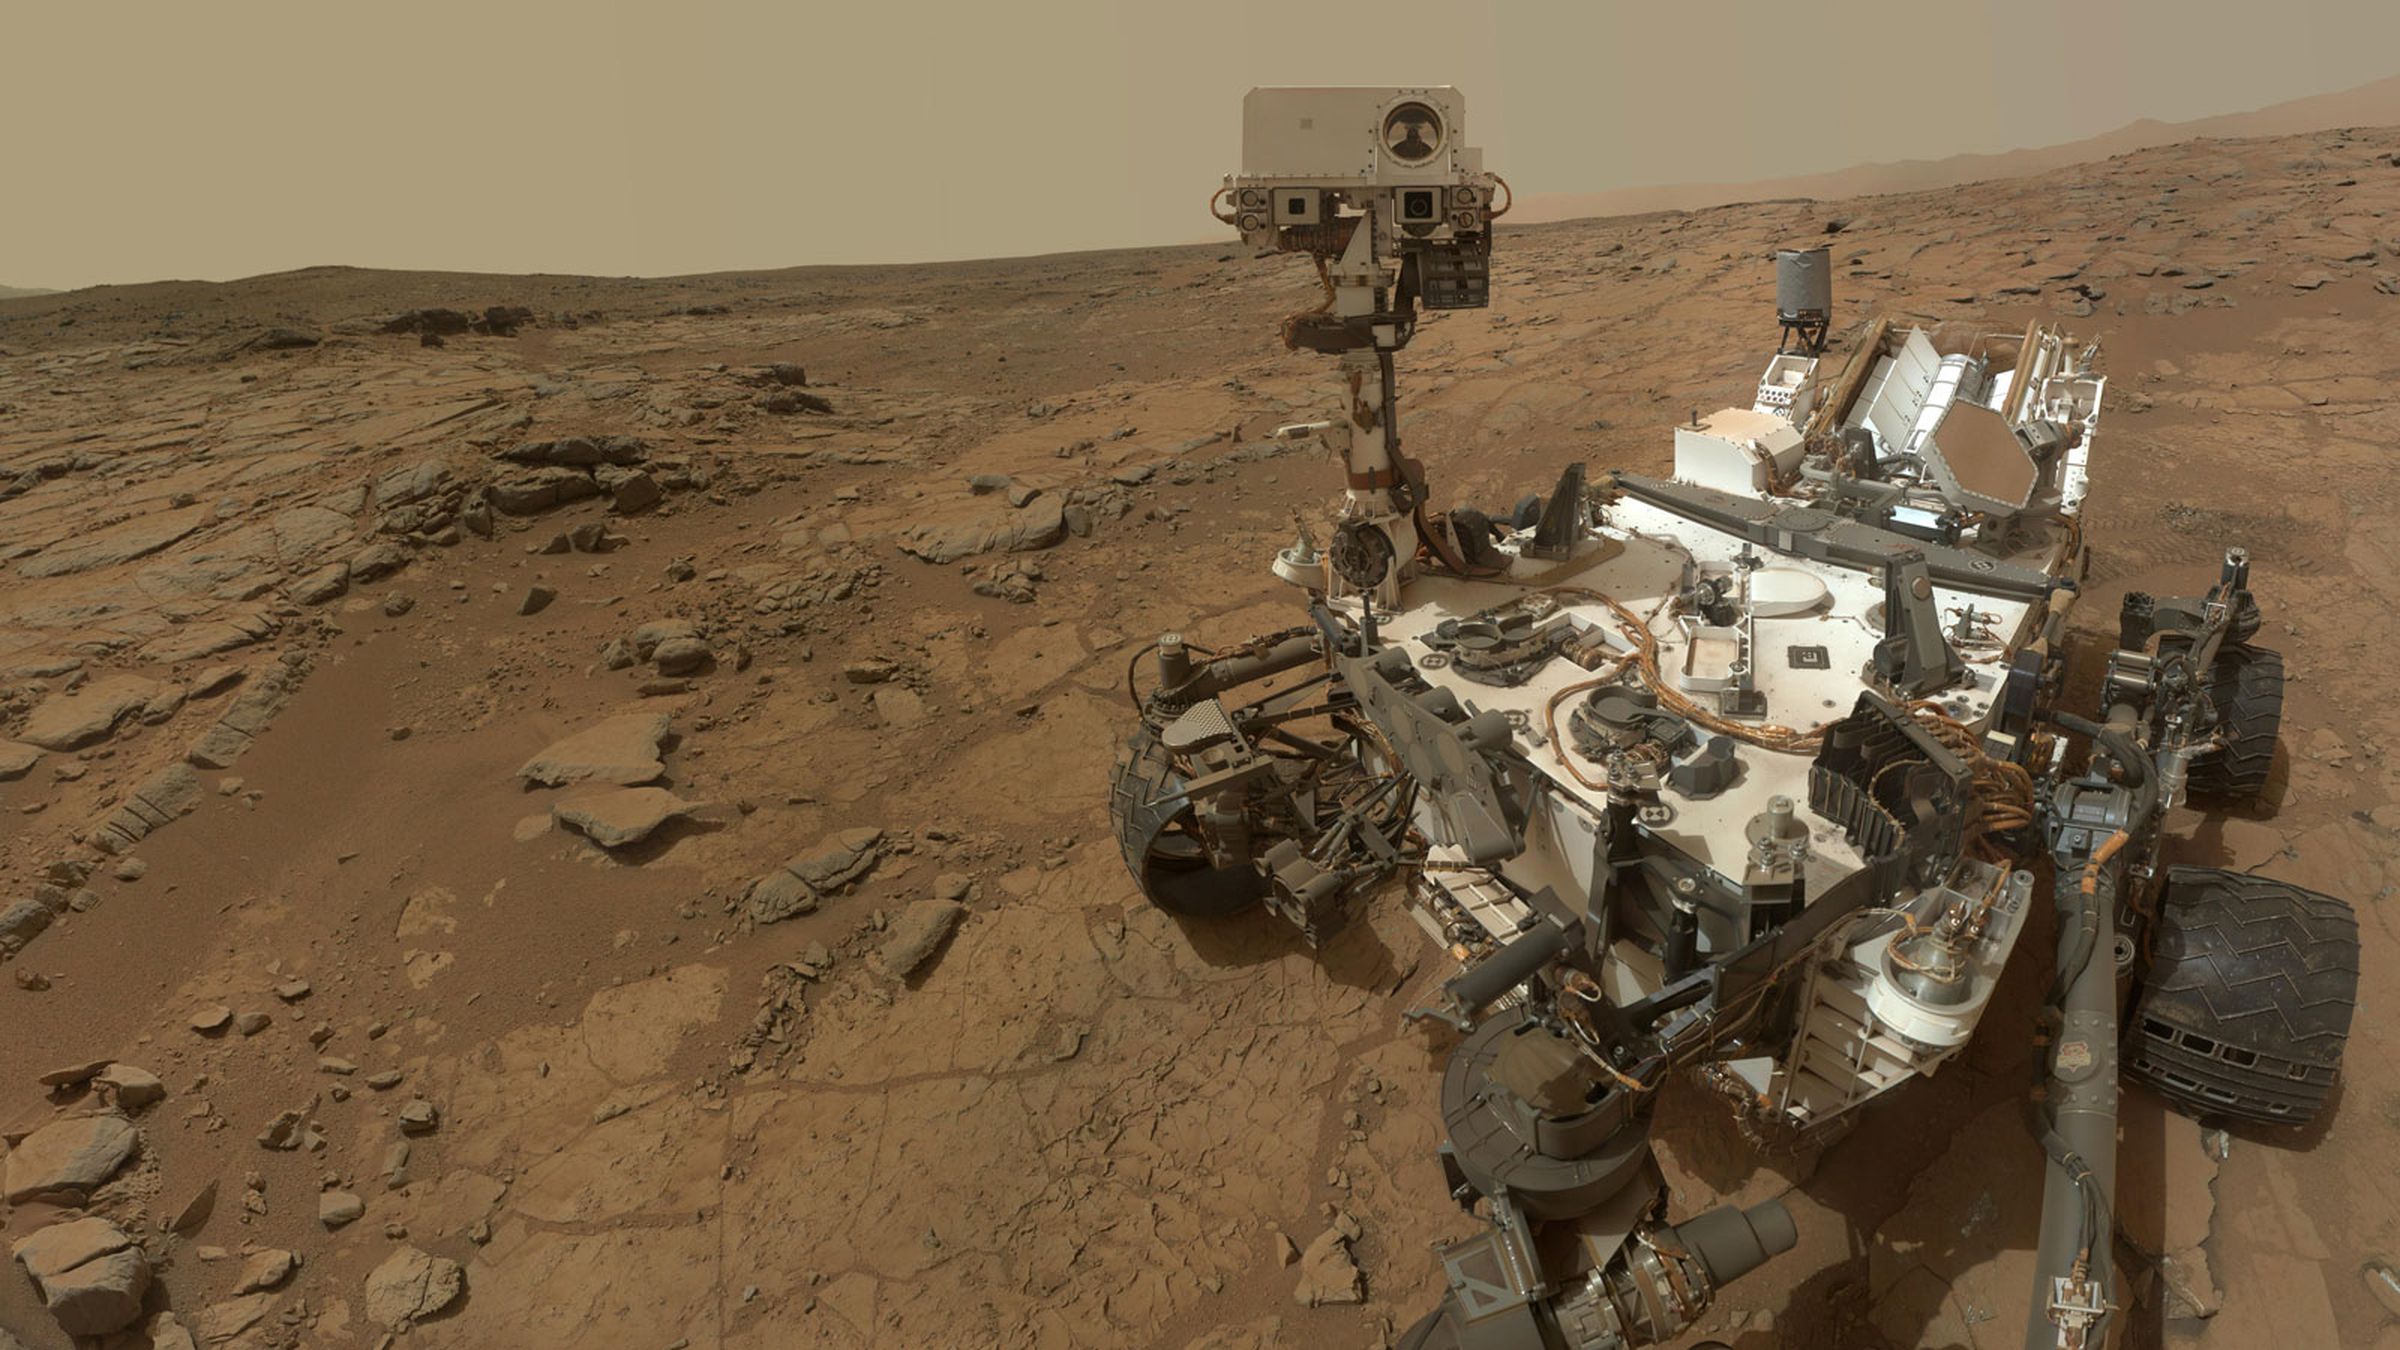 NASA’s Curiosity rover went through a lot of cleaning to avoid contamination before it was sent to Mars. However, it still brought over a lot hitchhiking microbes.